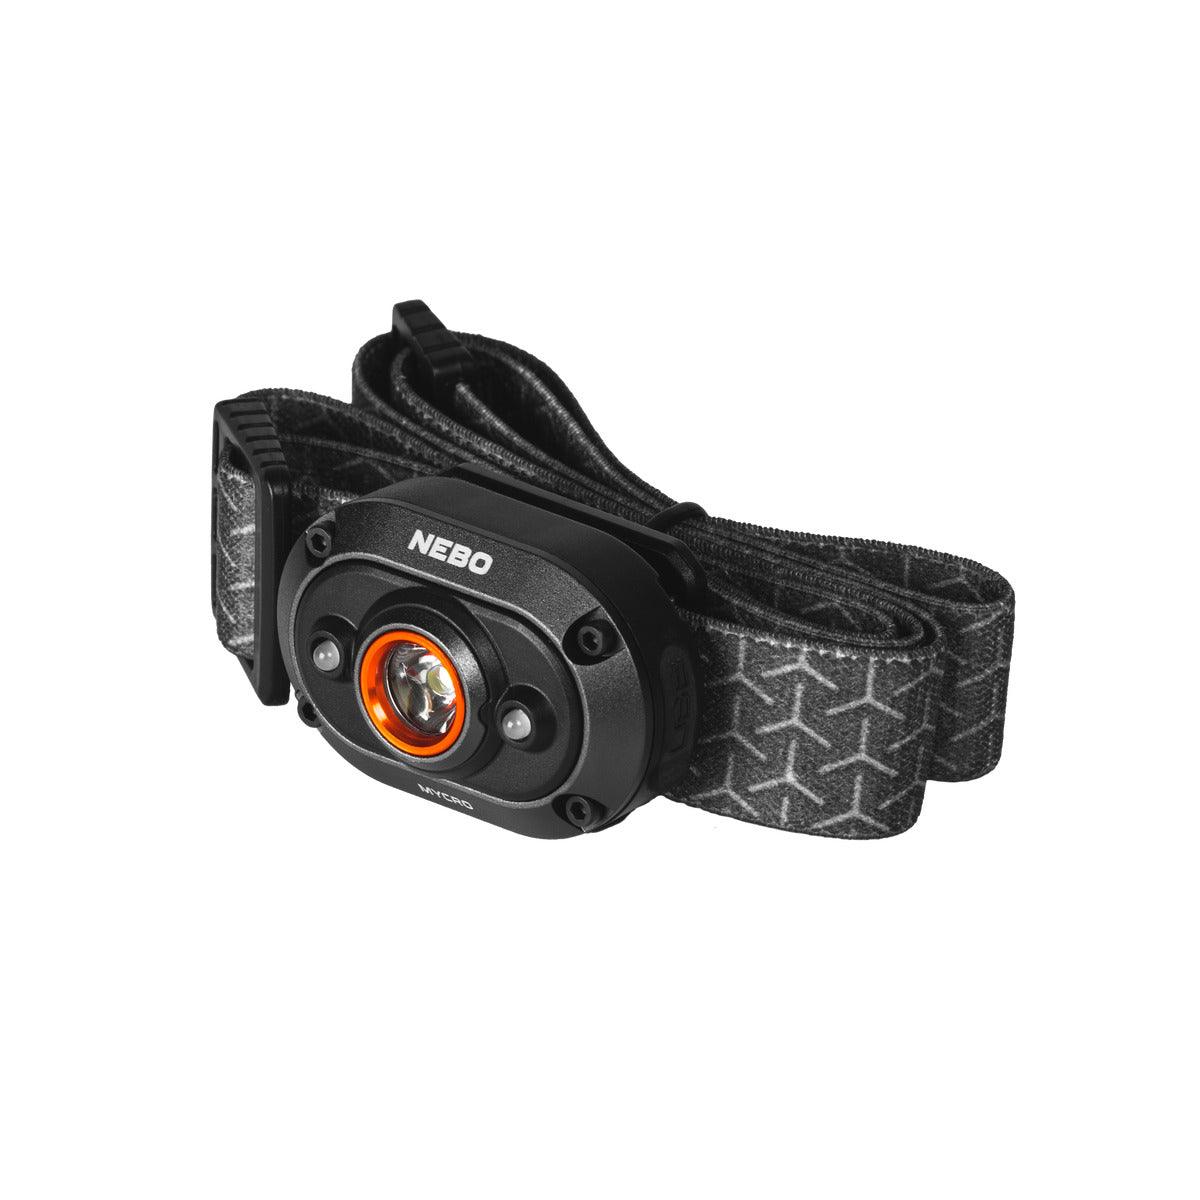 MYCRO 400 RECHARGEABLE HEADLAMP - The Low Vision Store